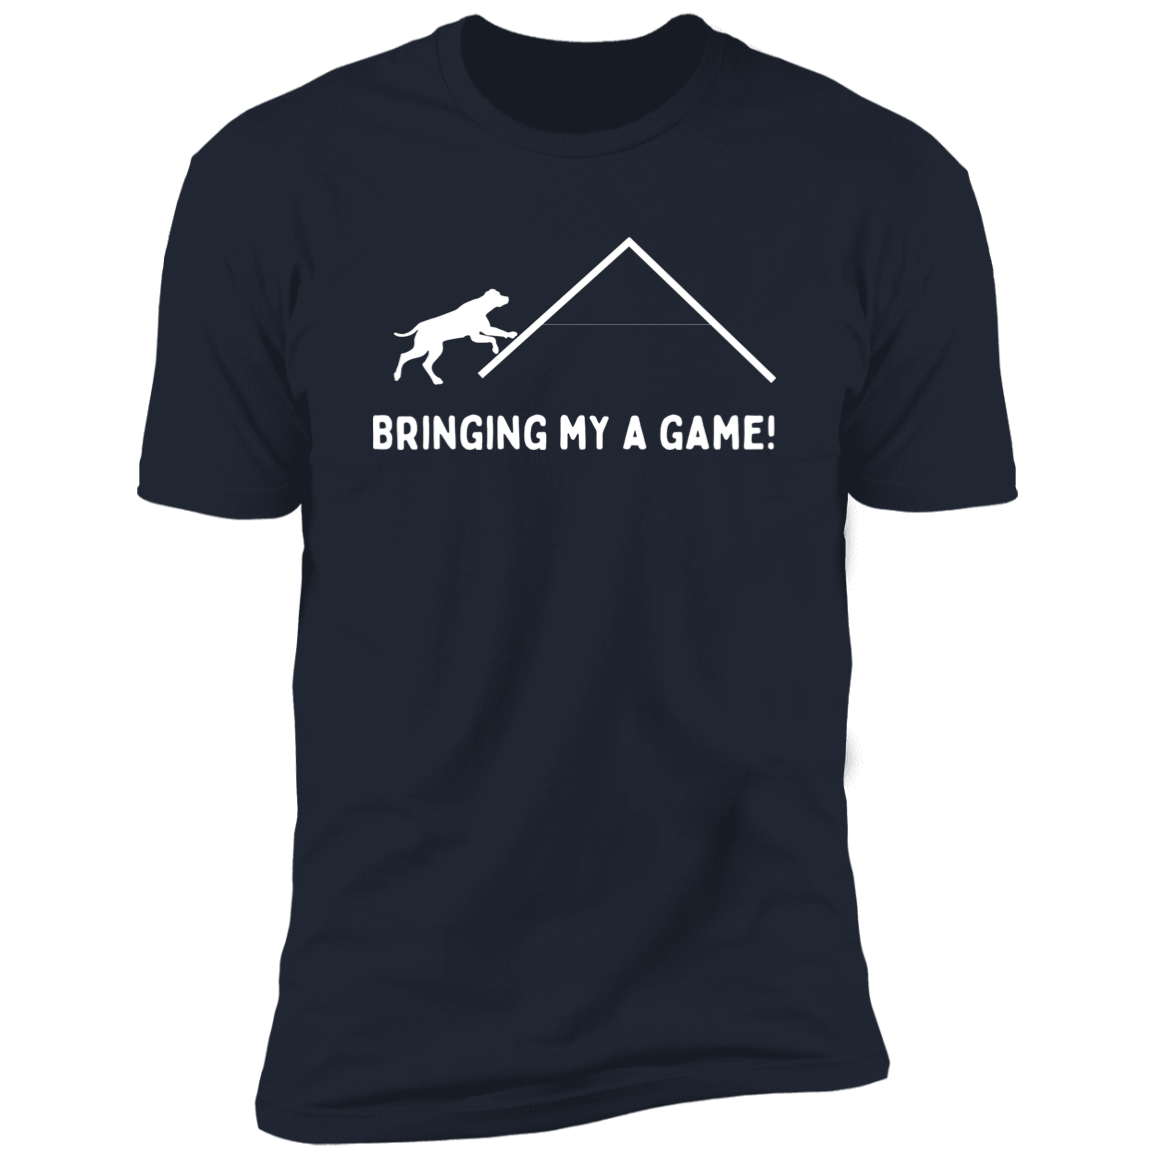 Bringing My A Game Agility T-shirt, Dog Agility Shirt for humans, in navy blue